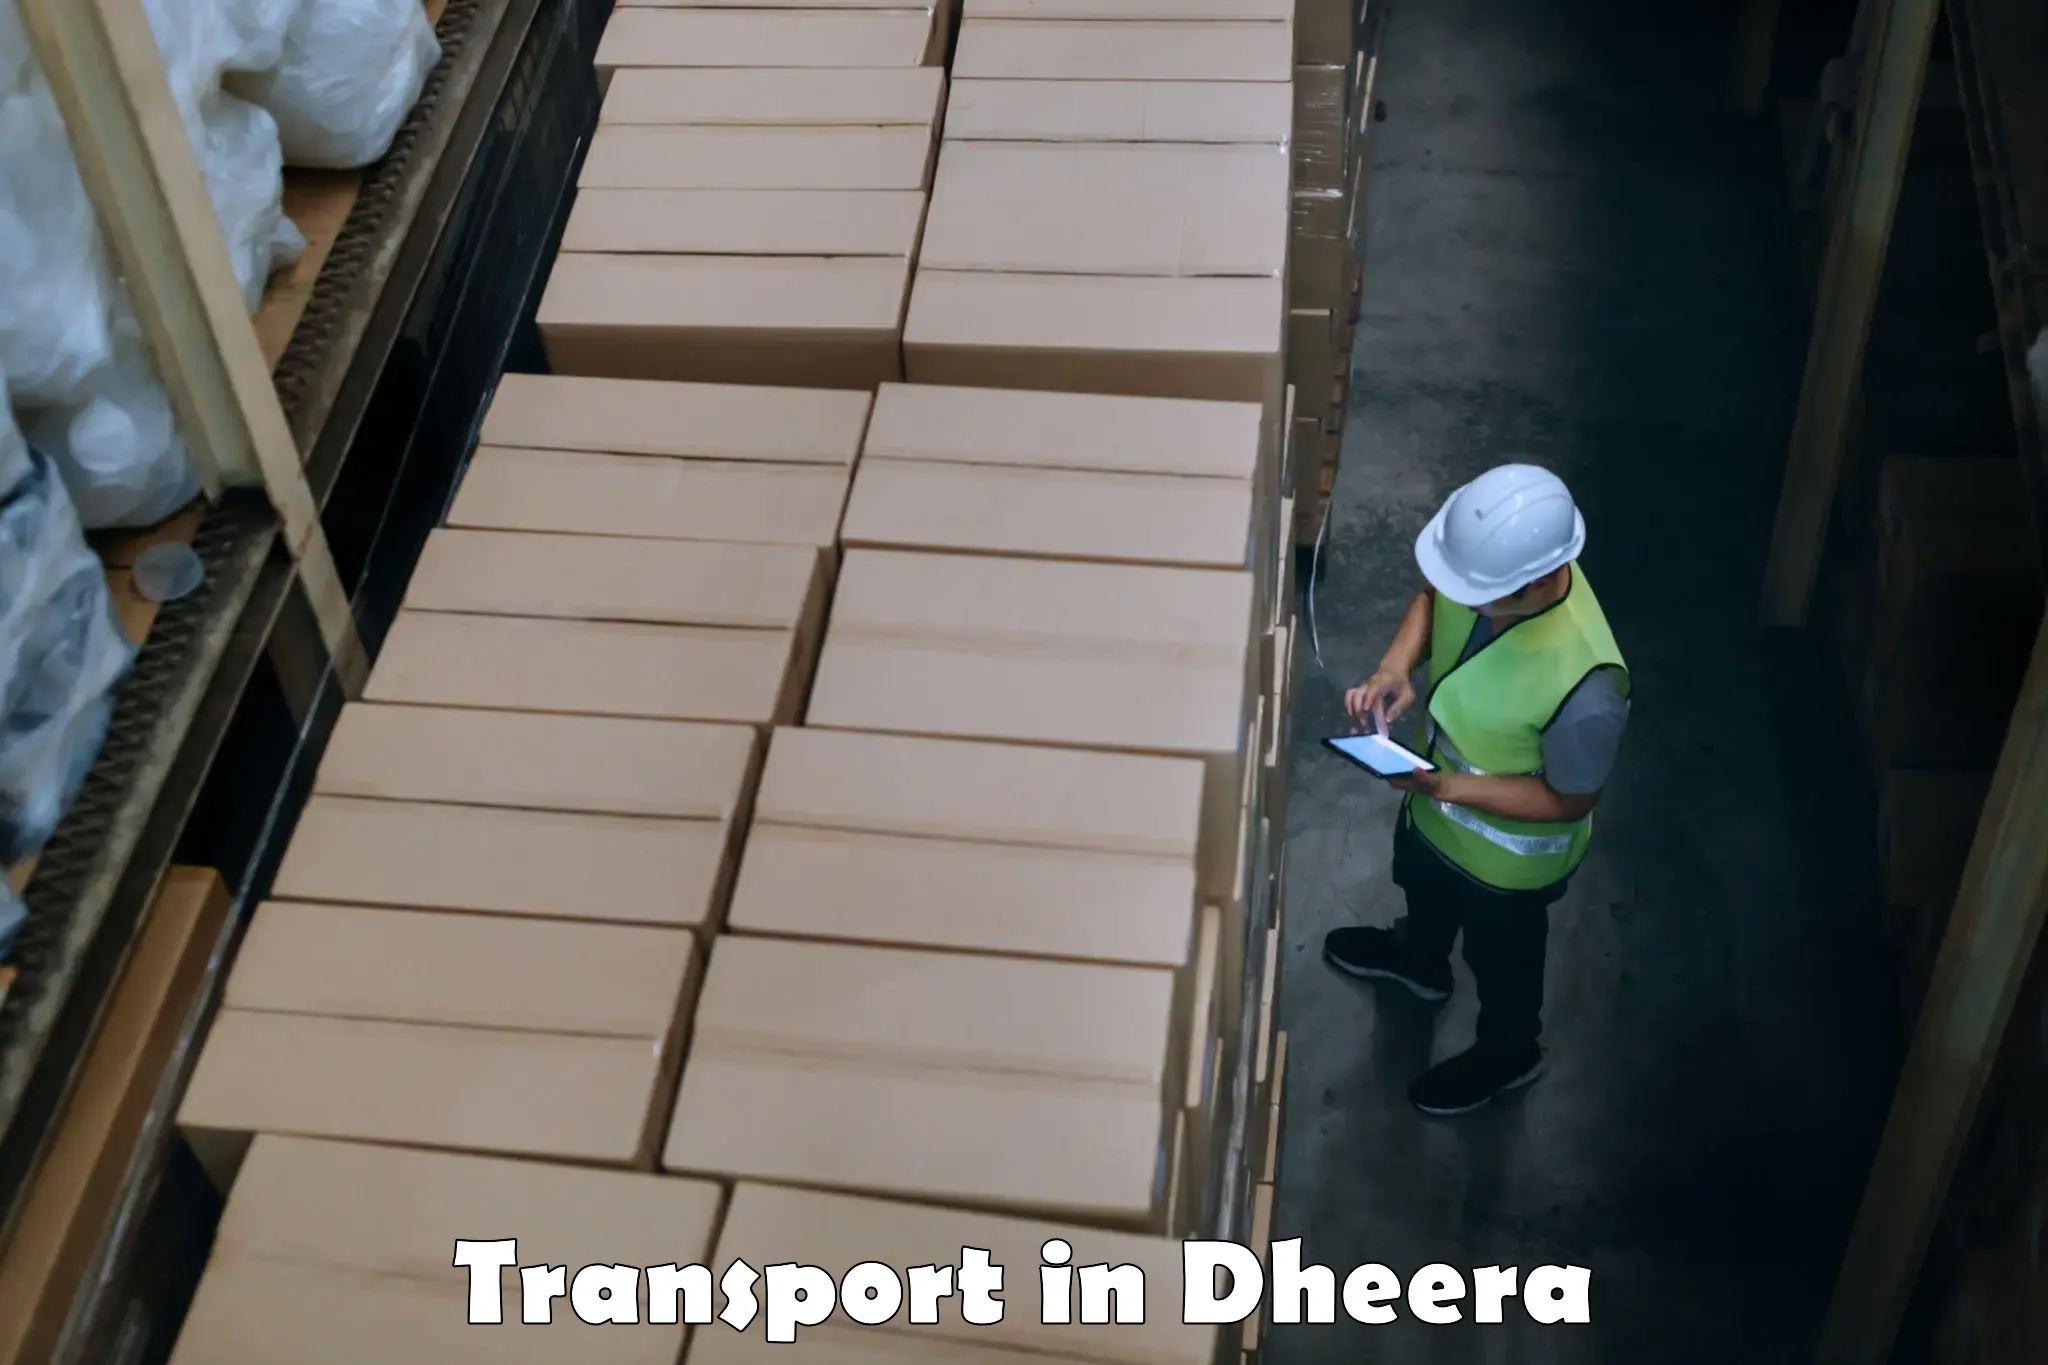 Container transport service in Dheera